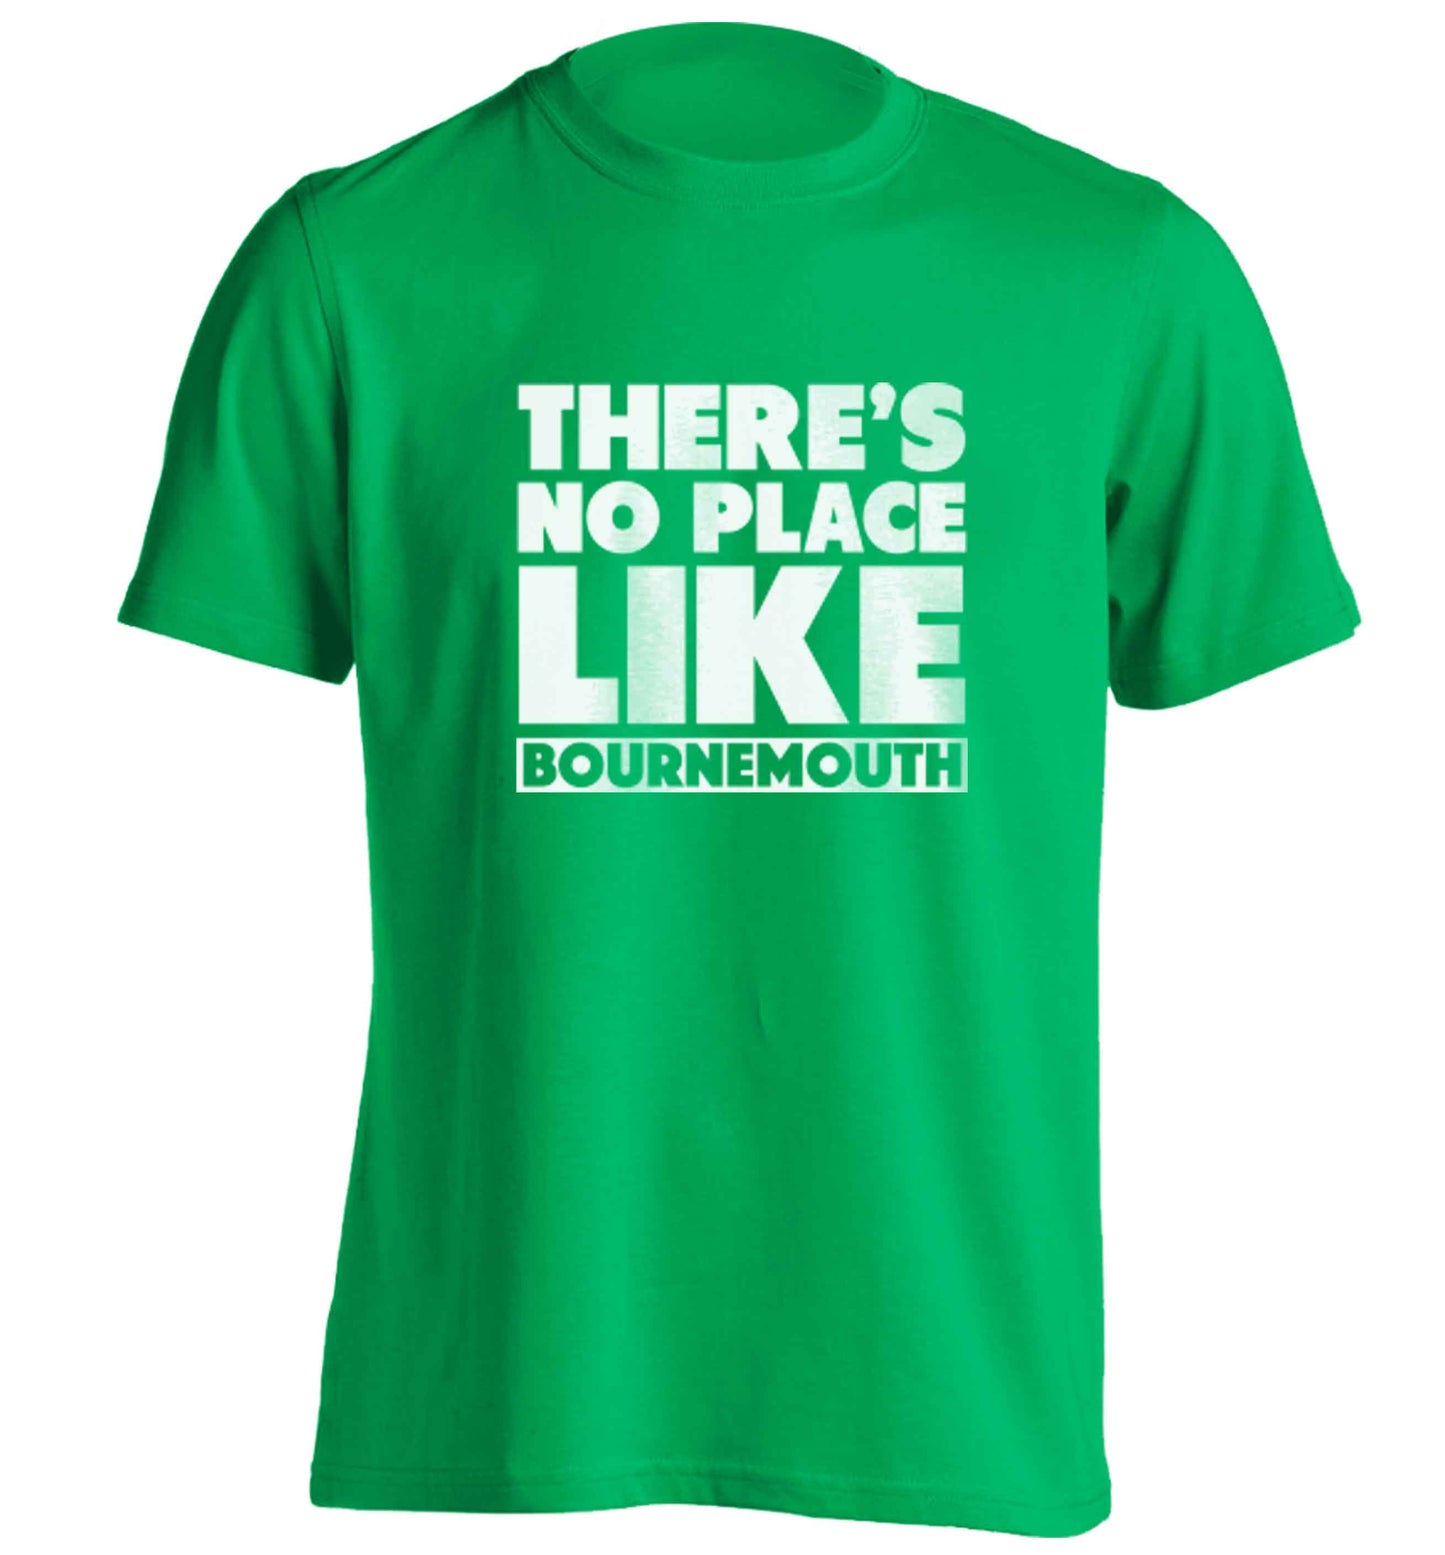 There's no place like Bournemouth adults unisex green Tshirt 2XL